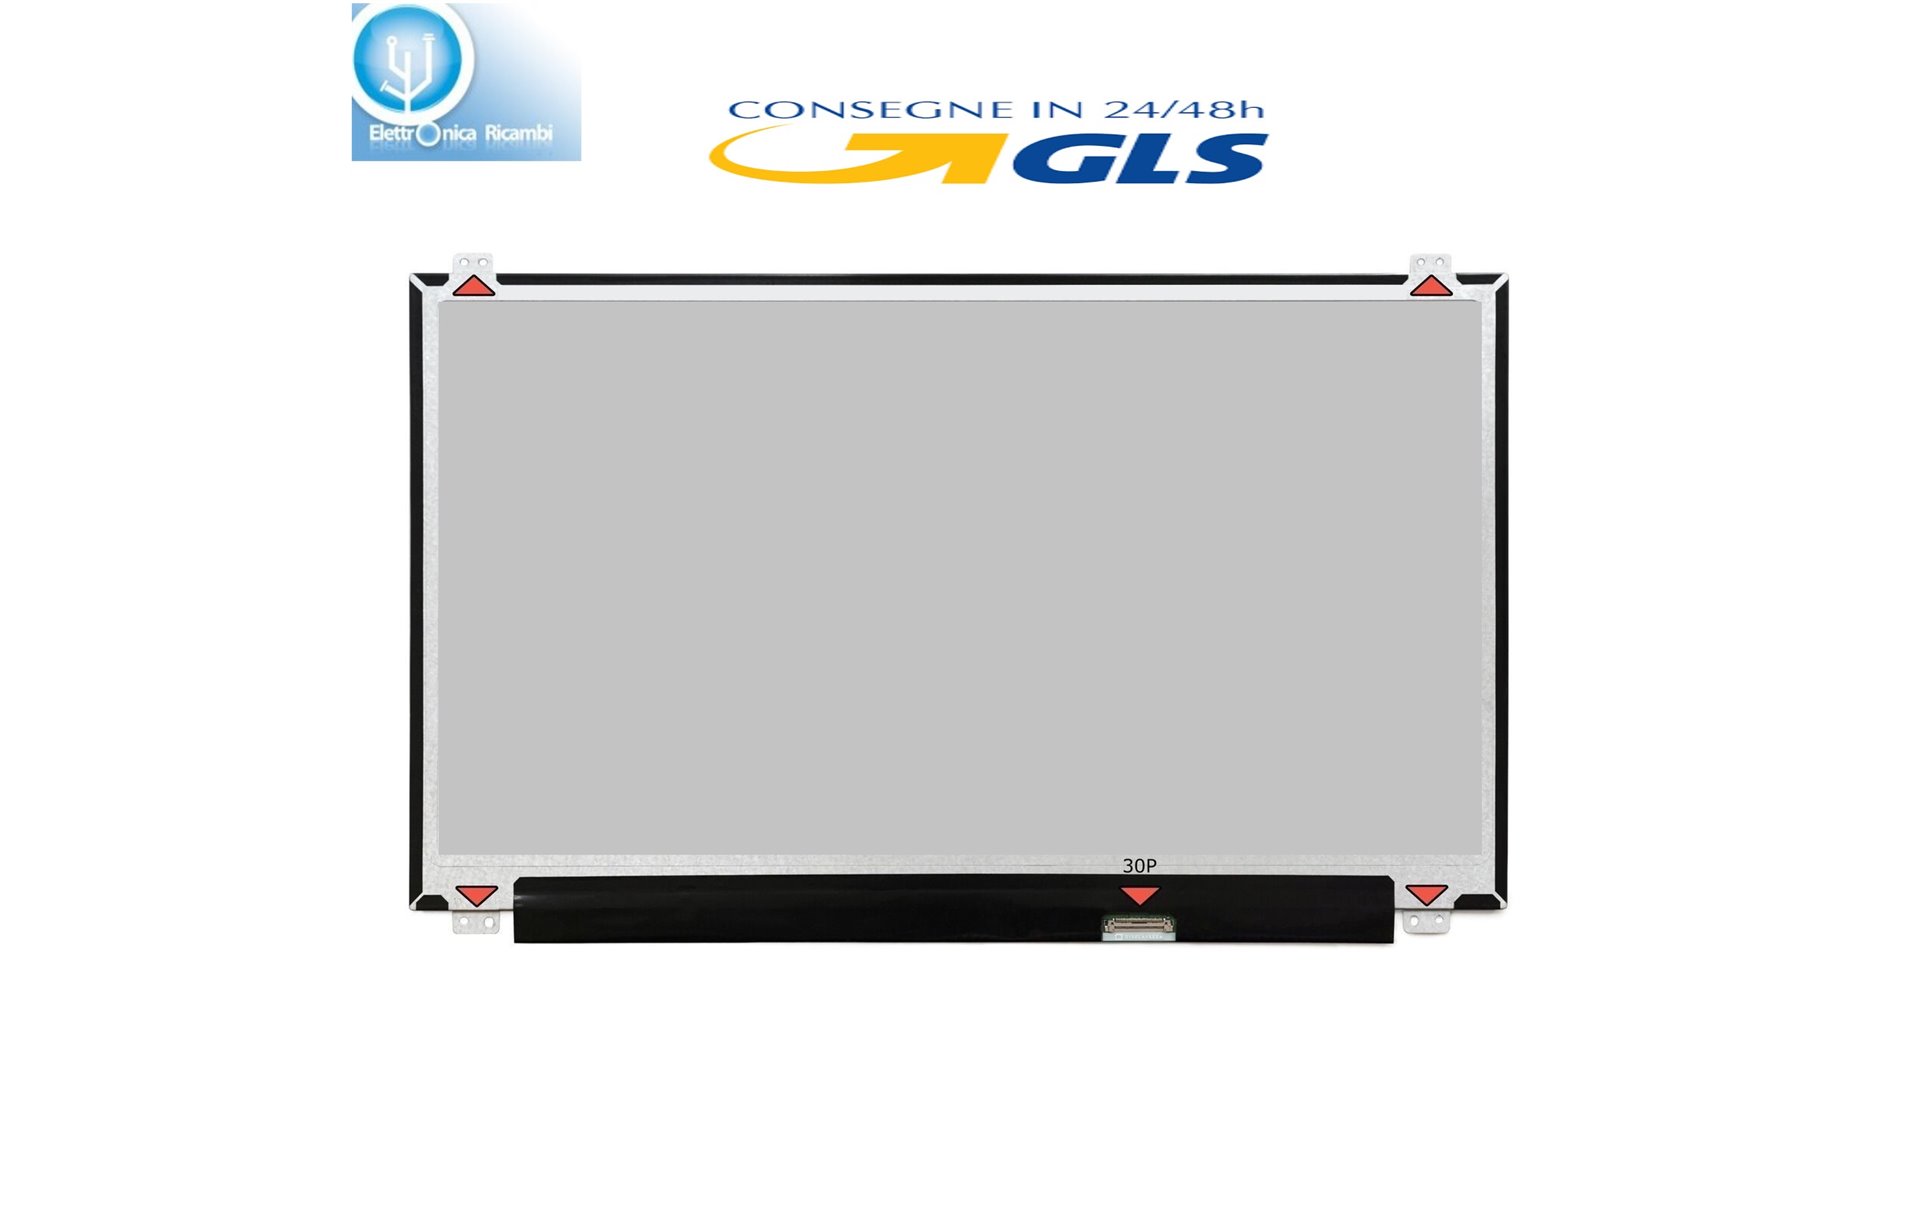 DISPLAY LCD CYBERPOWER TRACER II 15 200 15.6 1920x1080 LED 30 pin